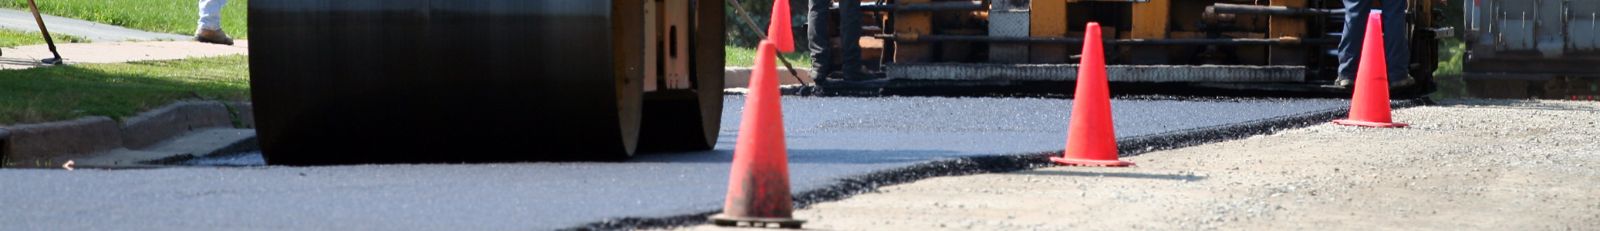 Image of road being paved.